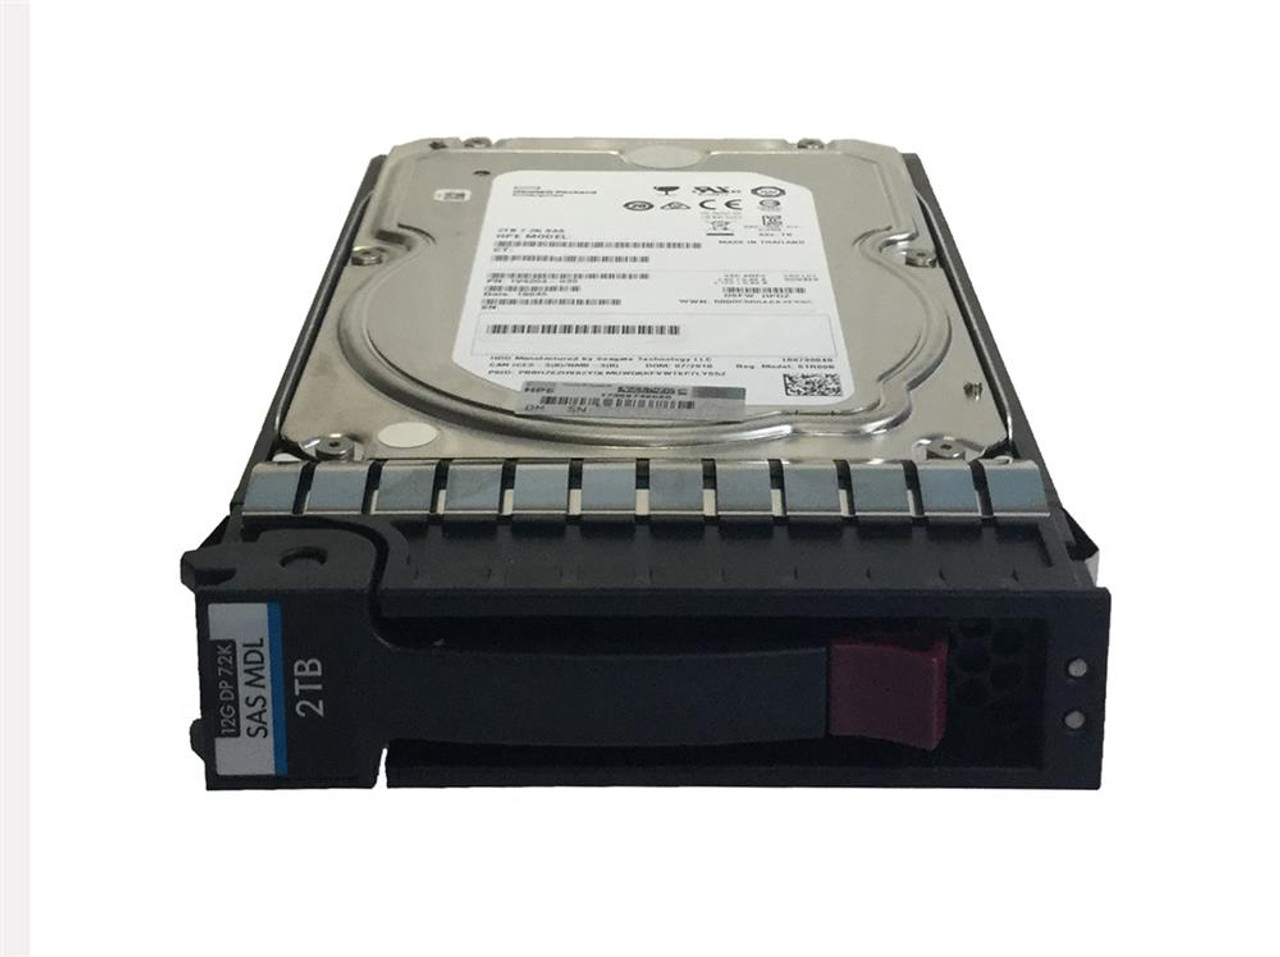 864917-001 HPE 2TB 7200RPM SAS 12Gbps 3.5-inch Internal Hard Drive with Smart Carrier